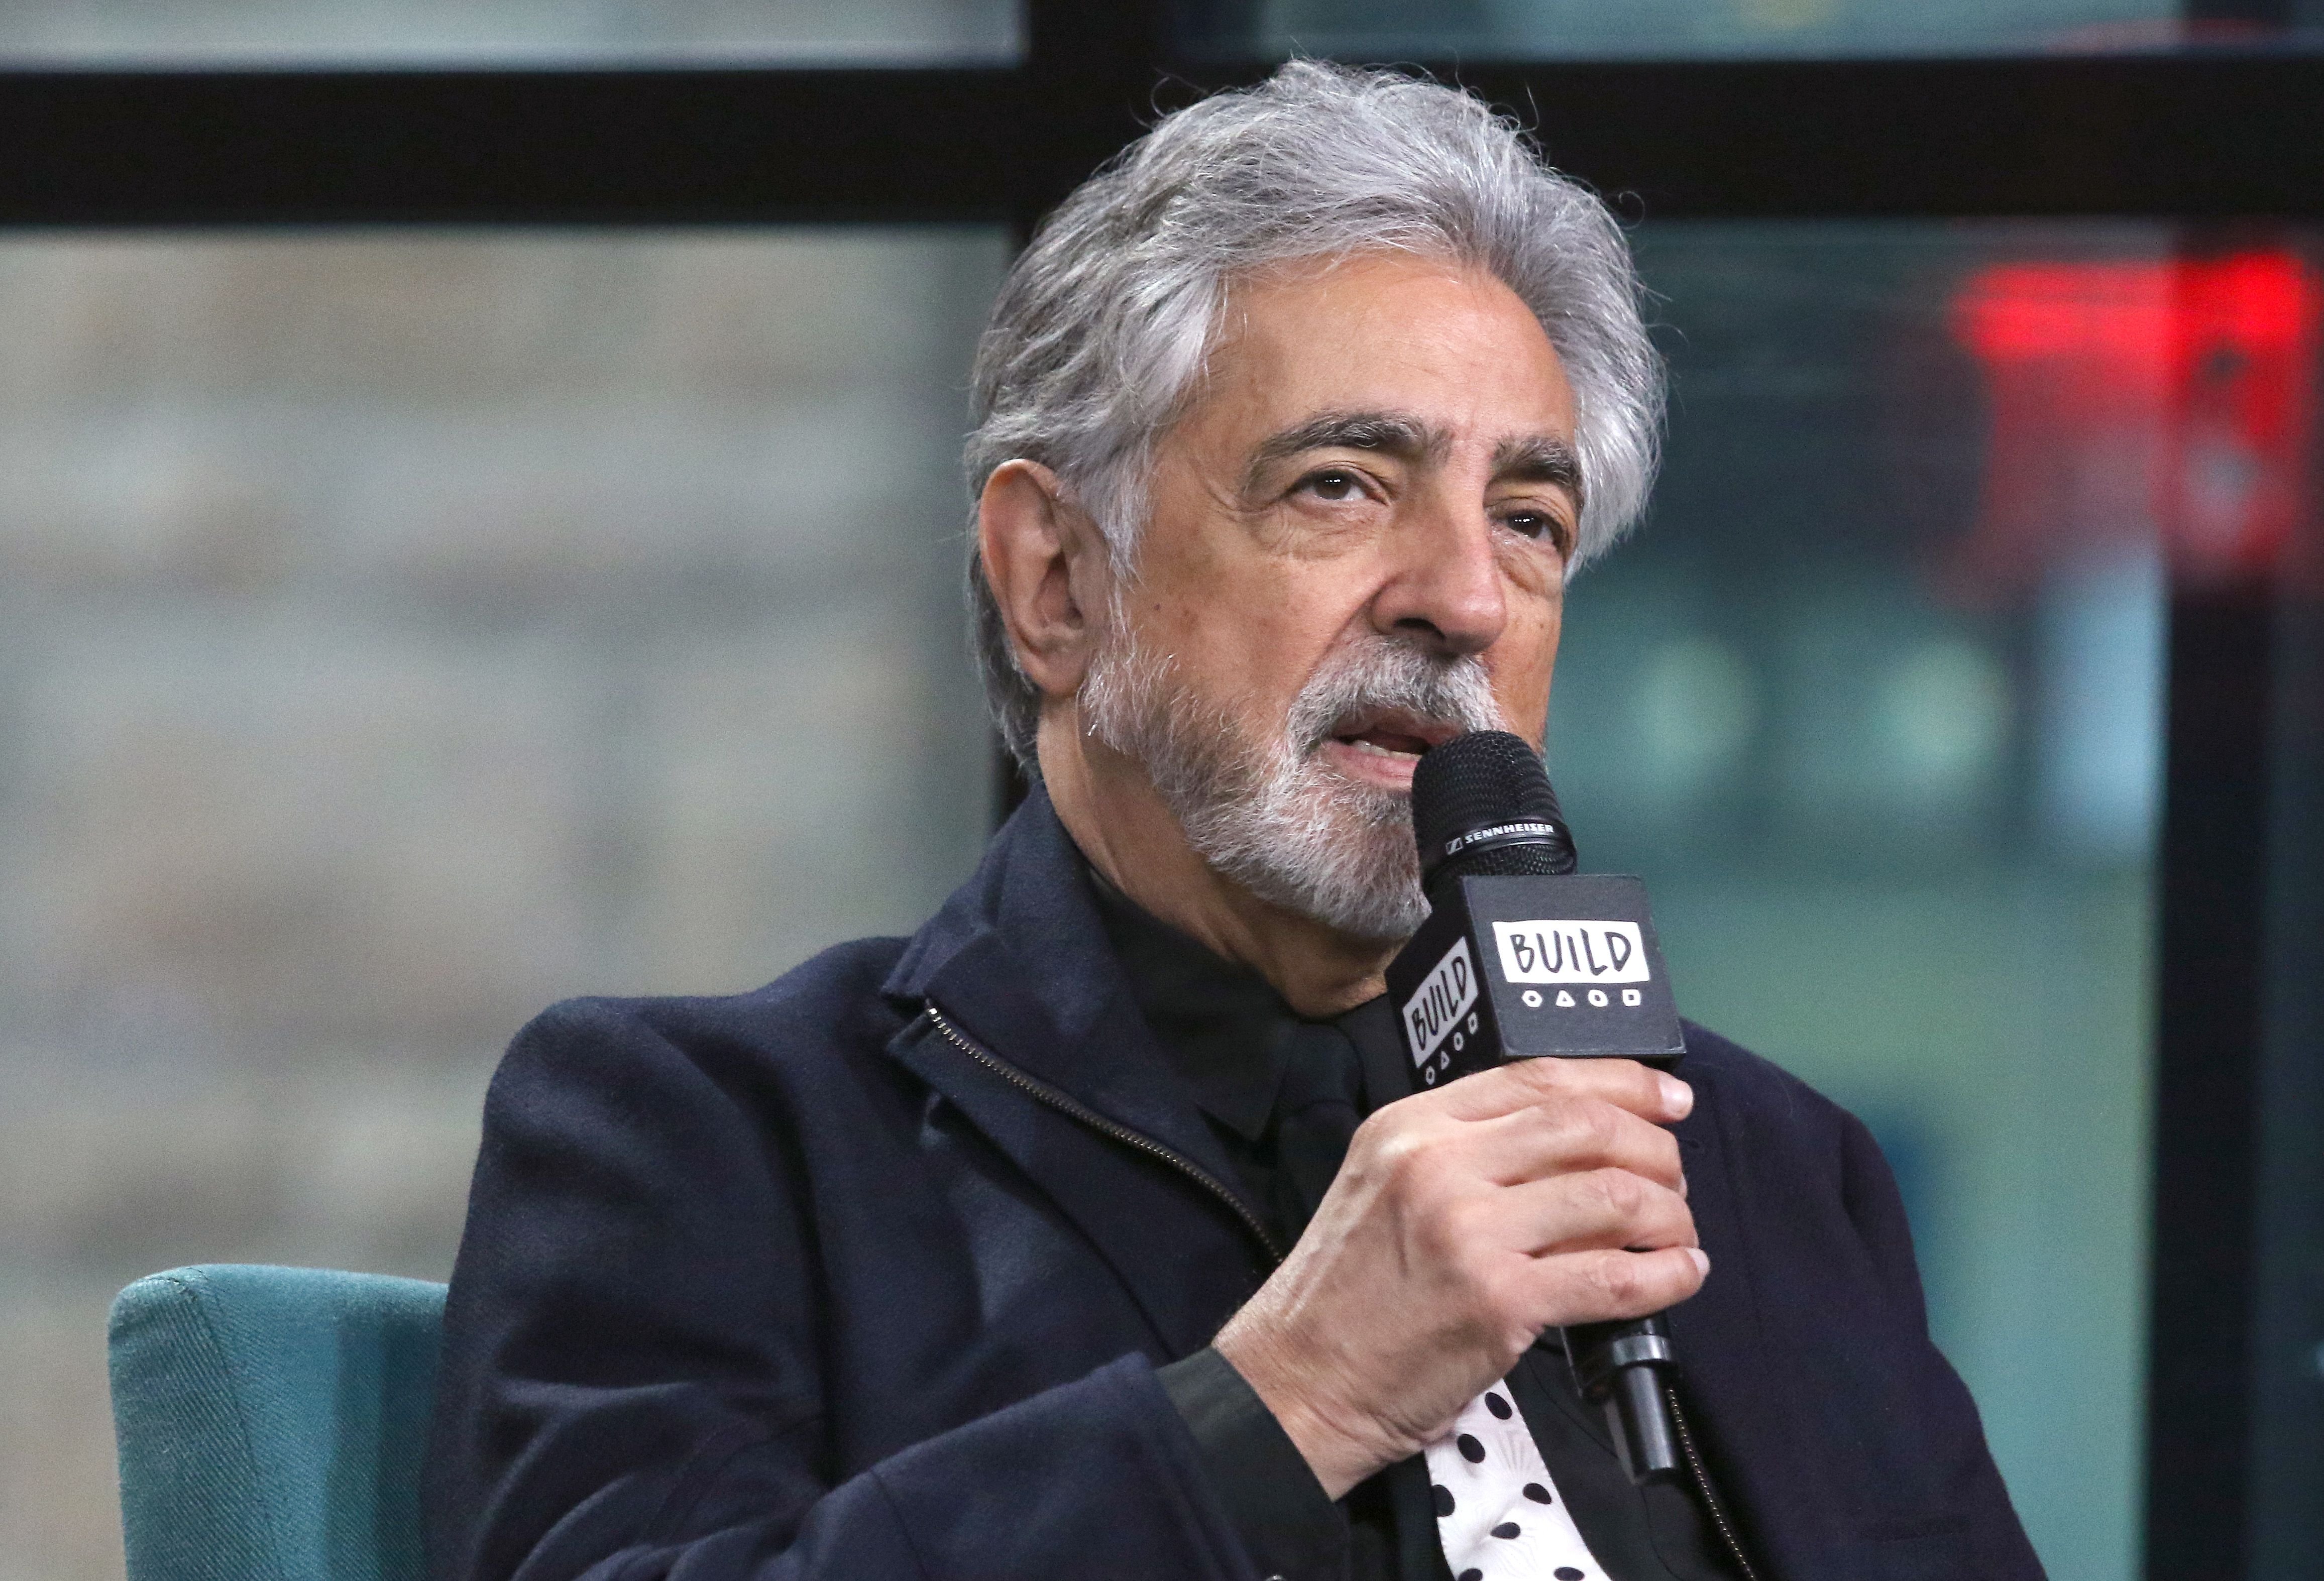 Joe Mantegna during the Build Series to discuss "Criminal Minds" at Build Studio on January 27, 2020 in New York City. | Source: Getty Images